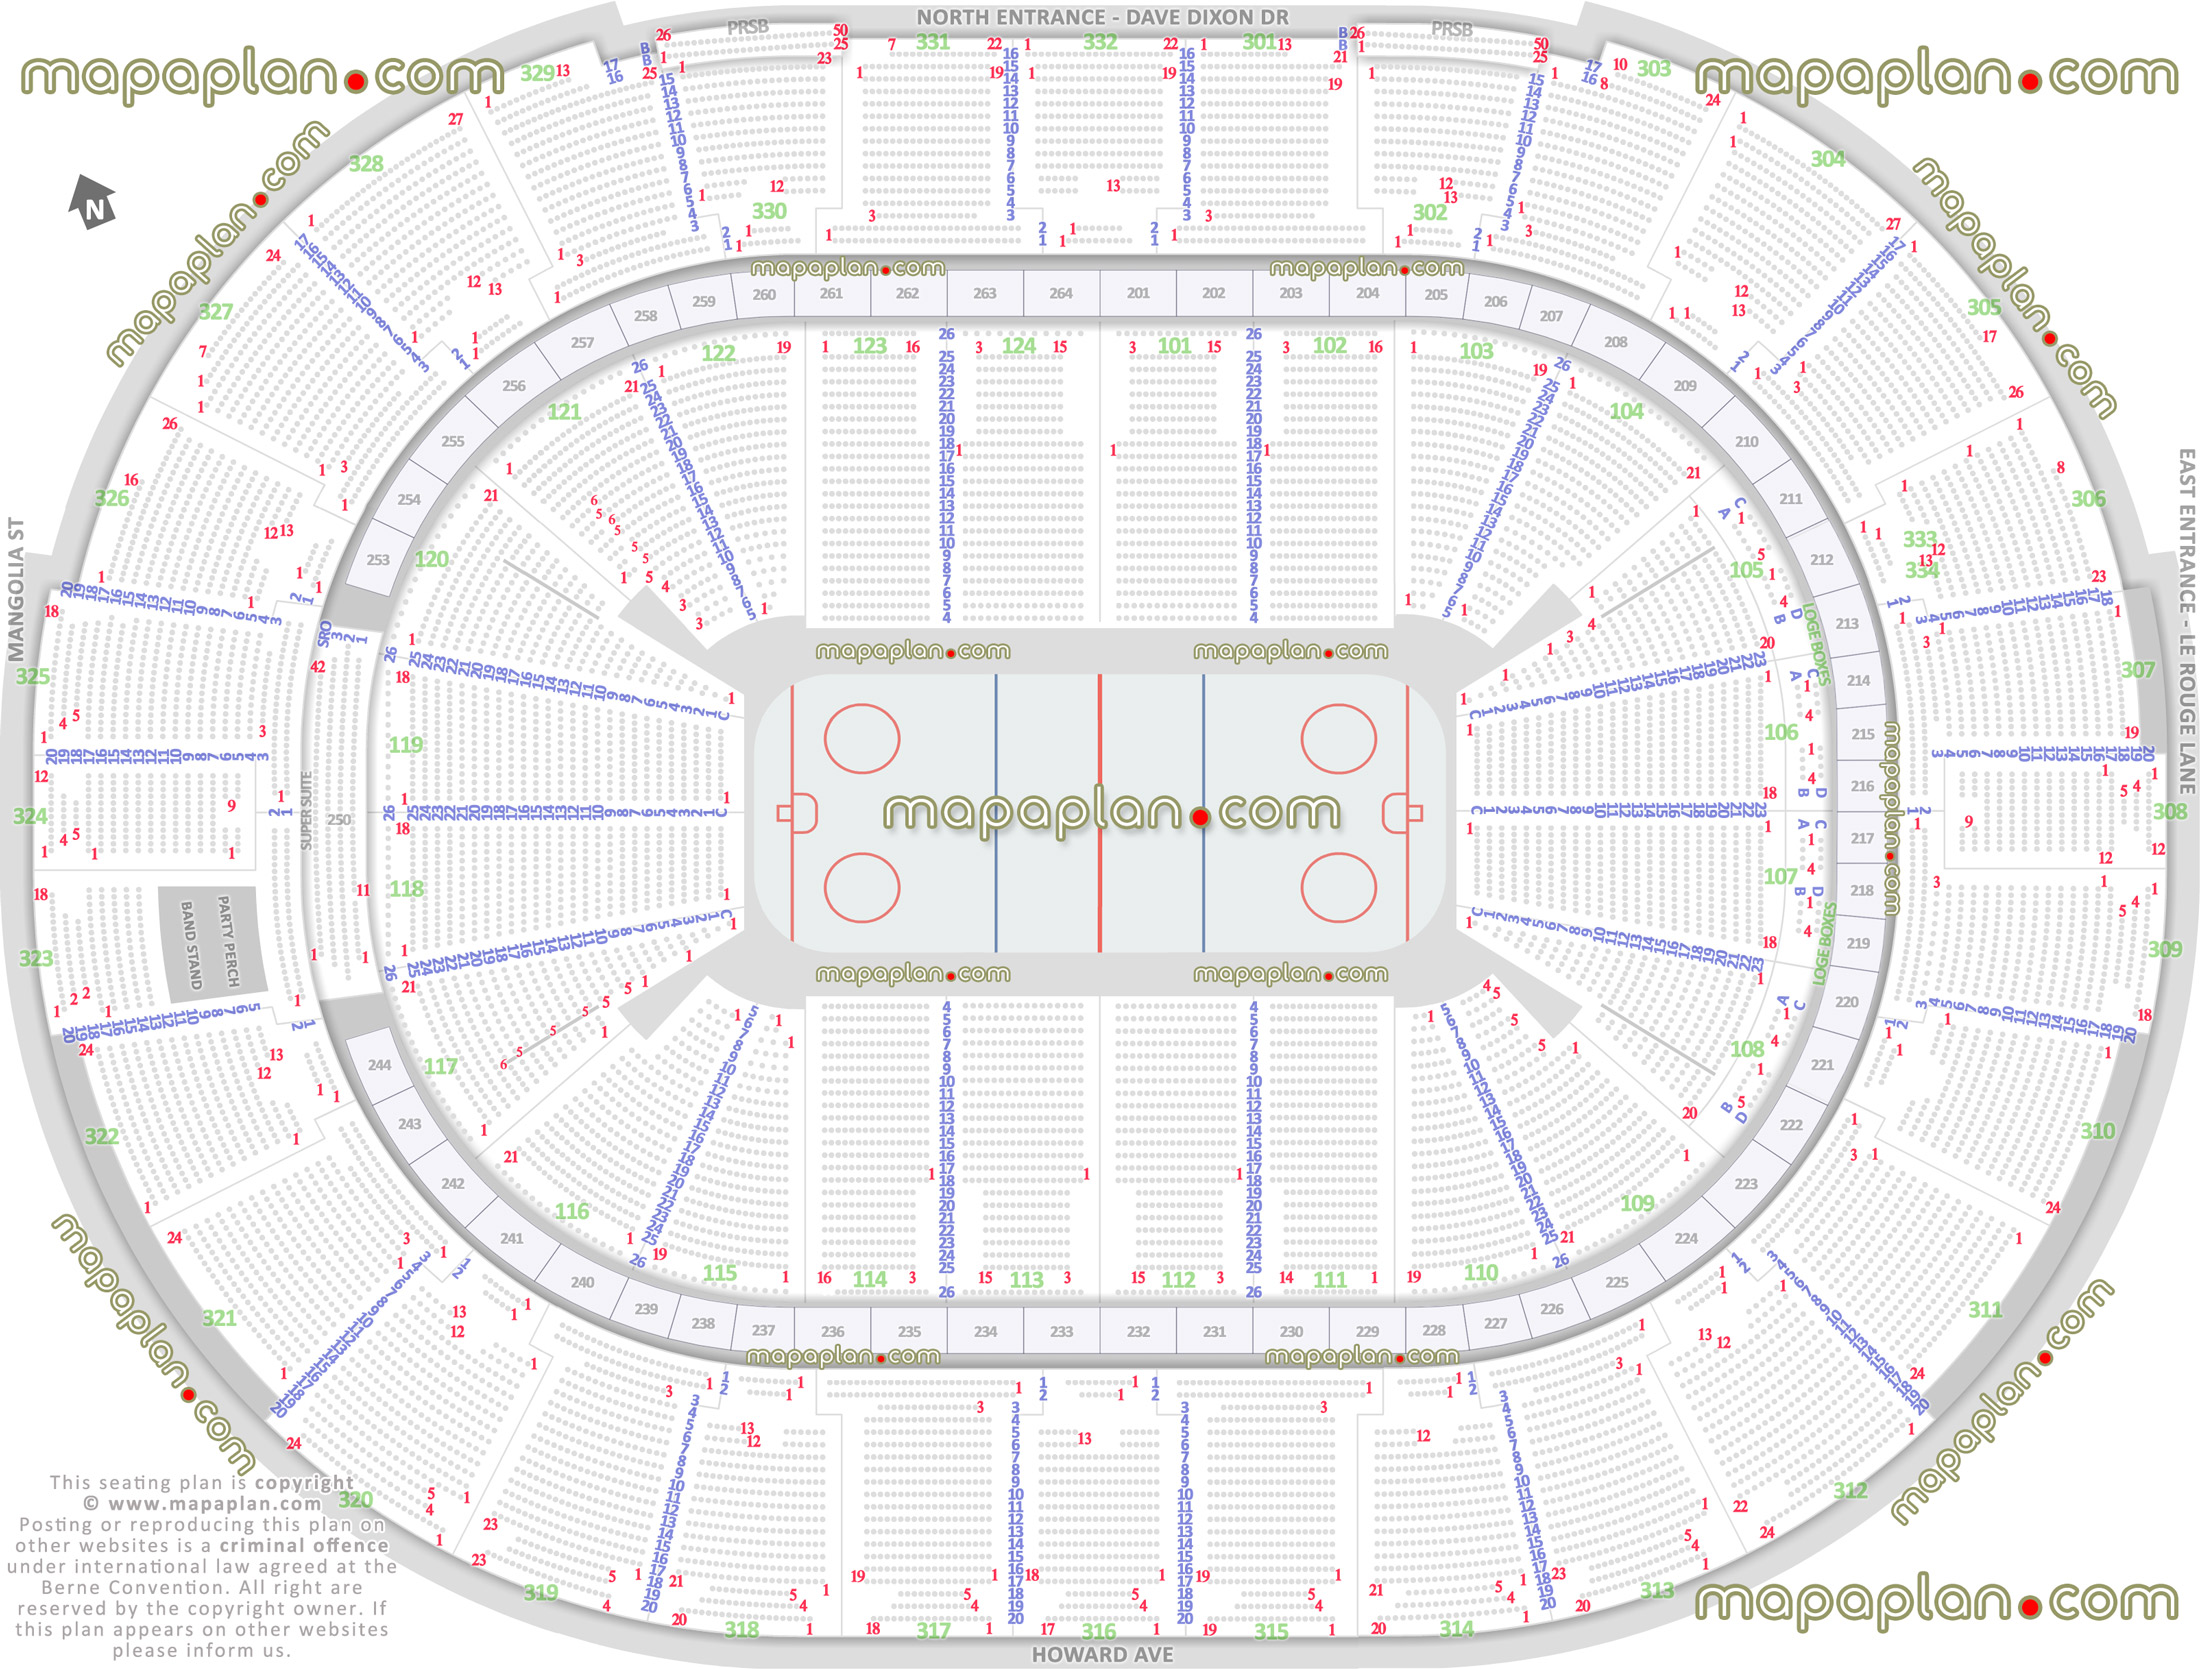 hockey games arena seating capacity arrangement diagram Smoothie King Center new orleans arena interactive virtual 3d detailed layout glass rinkside seats party perch band stand full exact row numbers plan seats row lower upper level stadium bowl sections New Orleans Smoothie King Center arena seating chart